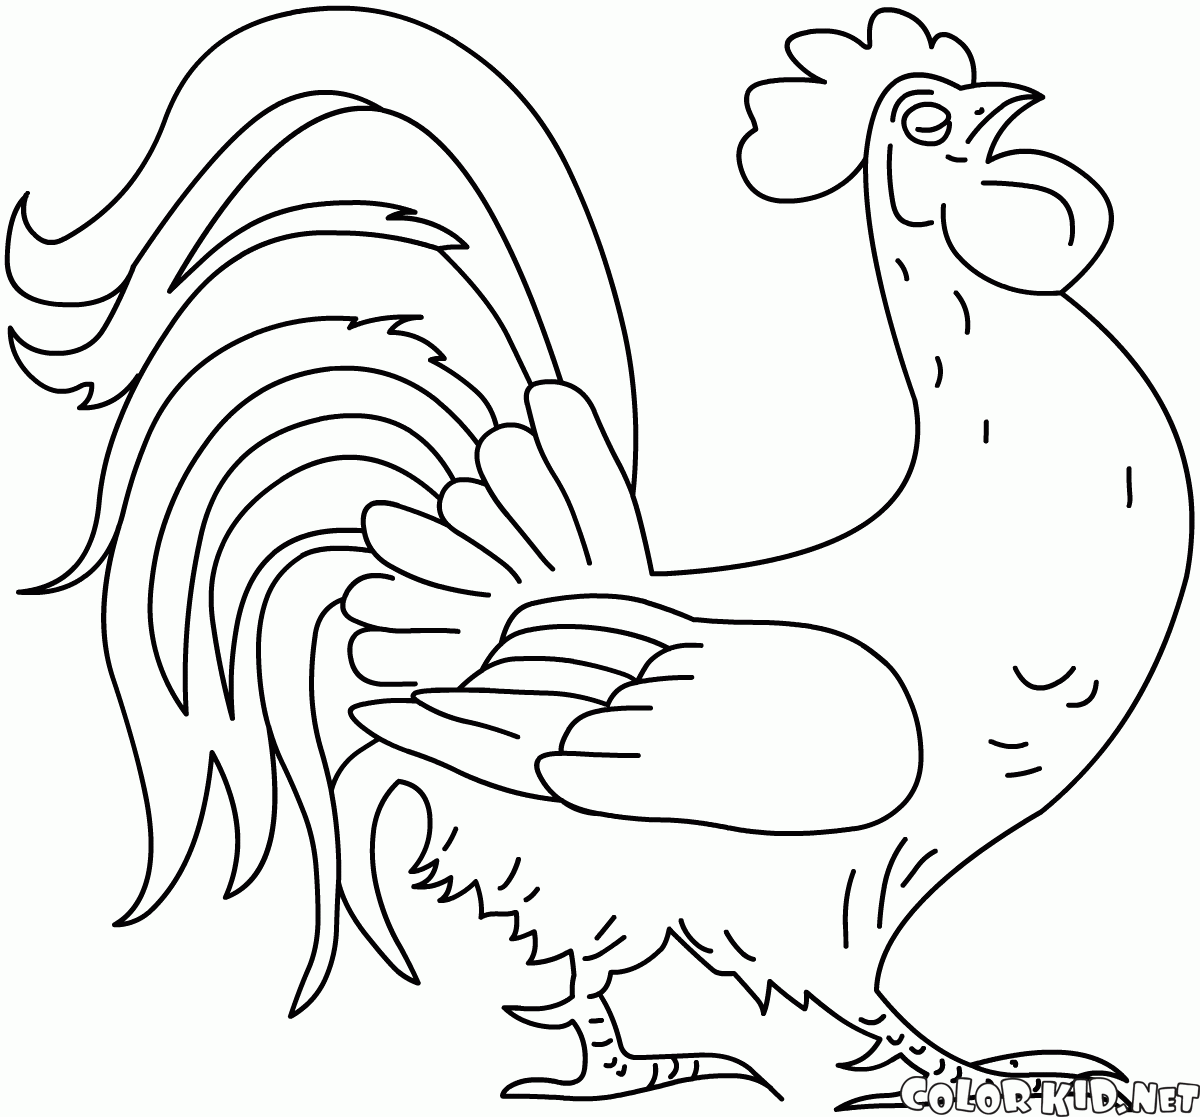 Coloring page Domestic animals